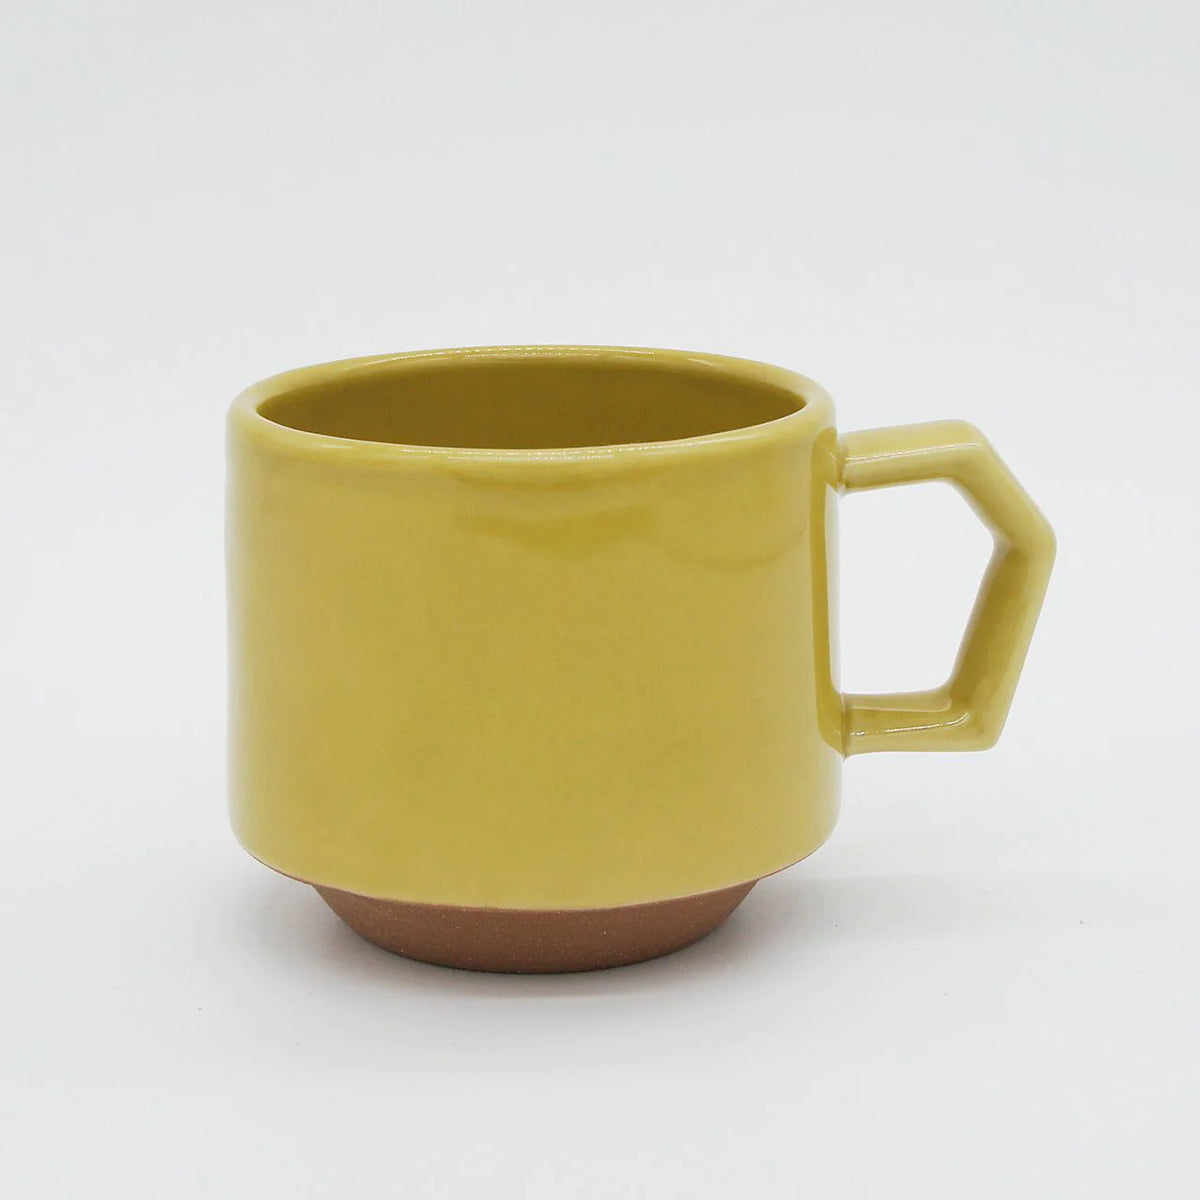 A yellow Stacking Mug – Mustard with a handle on a white background made by CHIPS Inc.